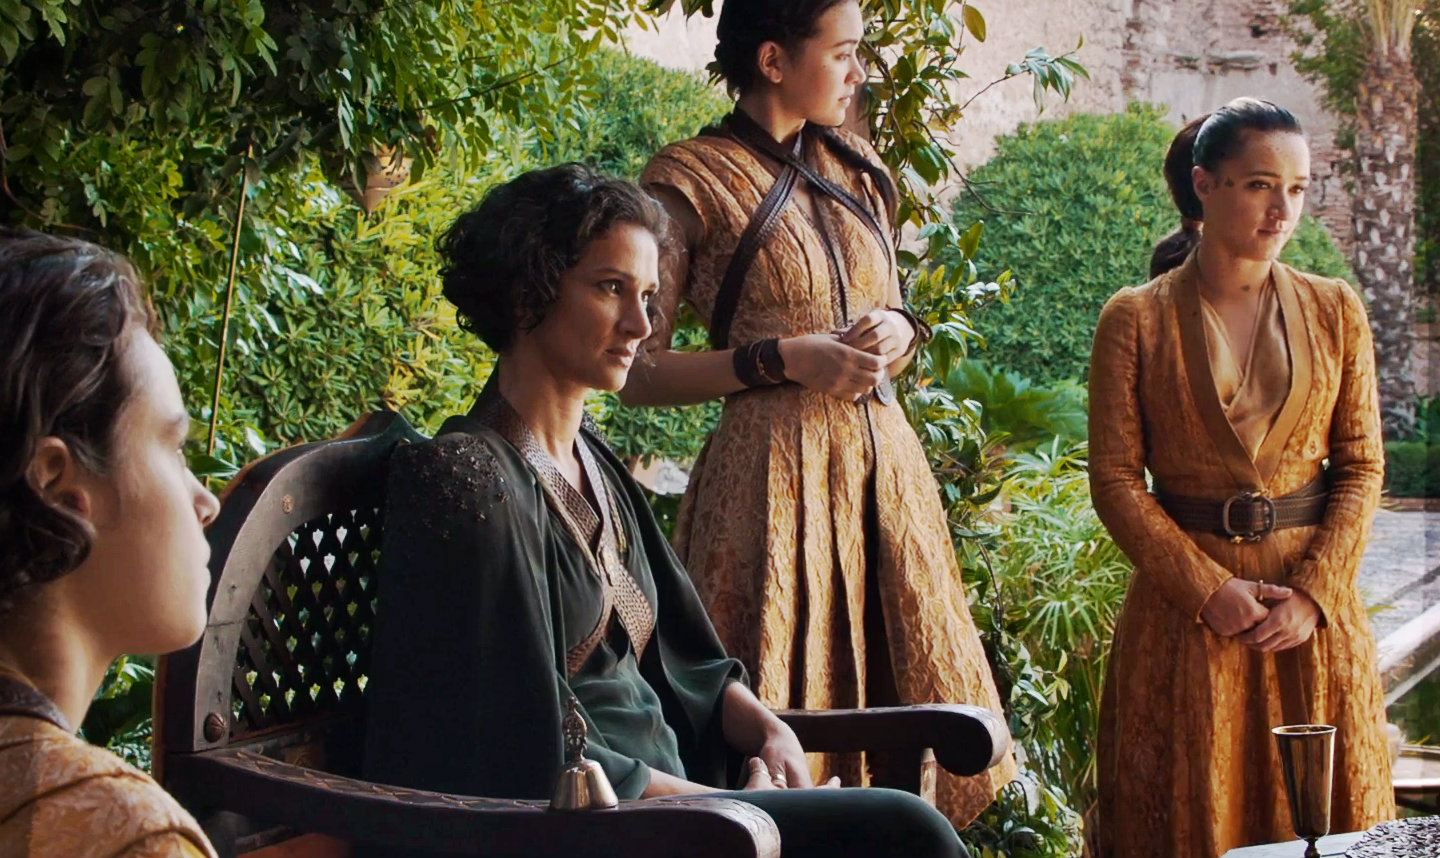 Ellaria Sand sits in her chair, surrounded by her supporters on a nice day in Game of Thrones